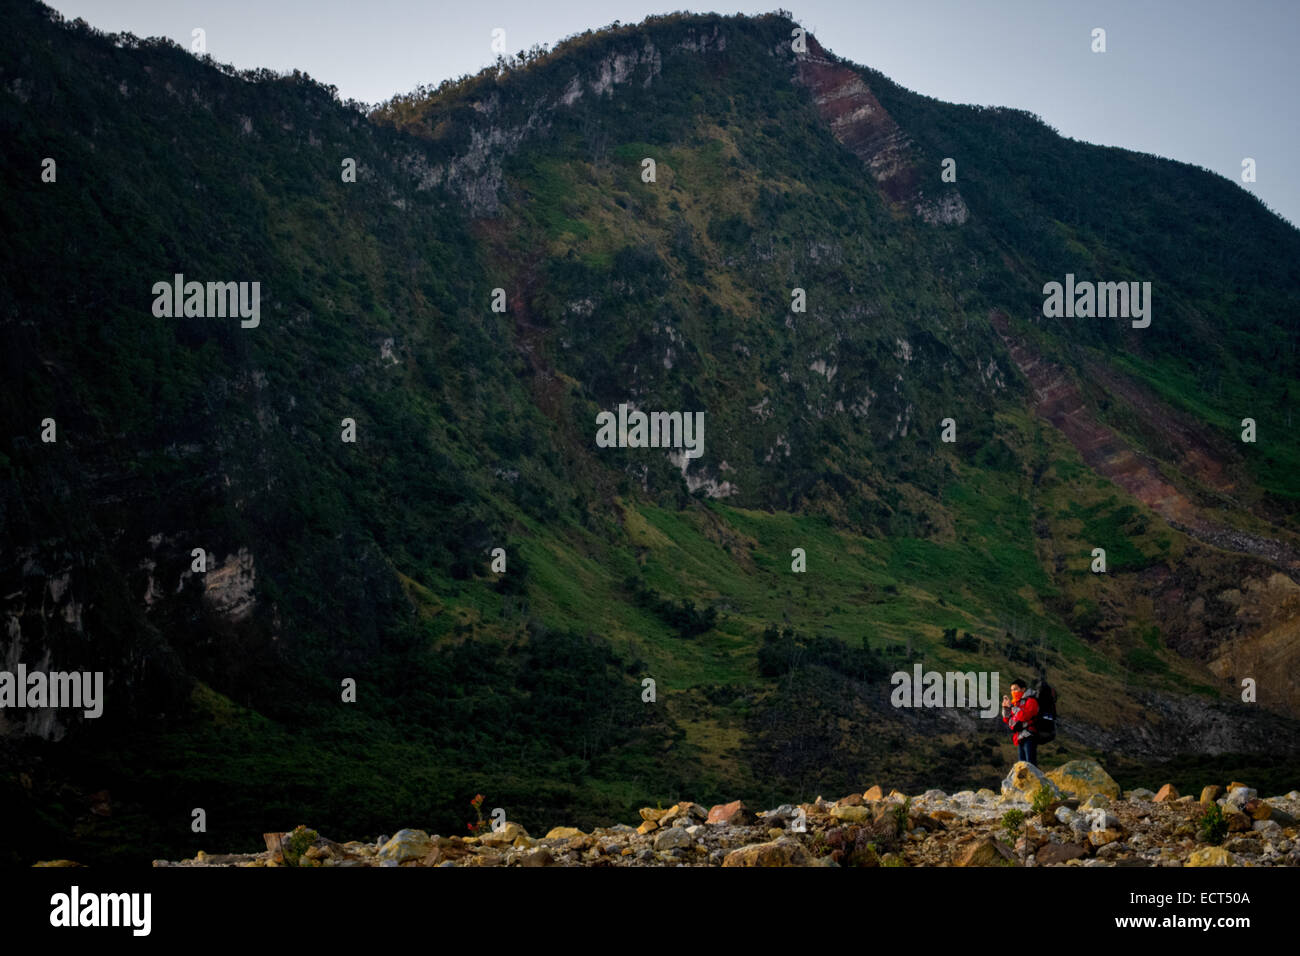 A climber in red jacket with the caldera wall of Mount Papandayan in the background. Stock Photo